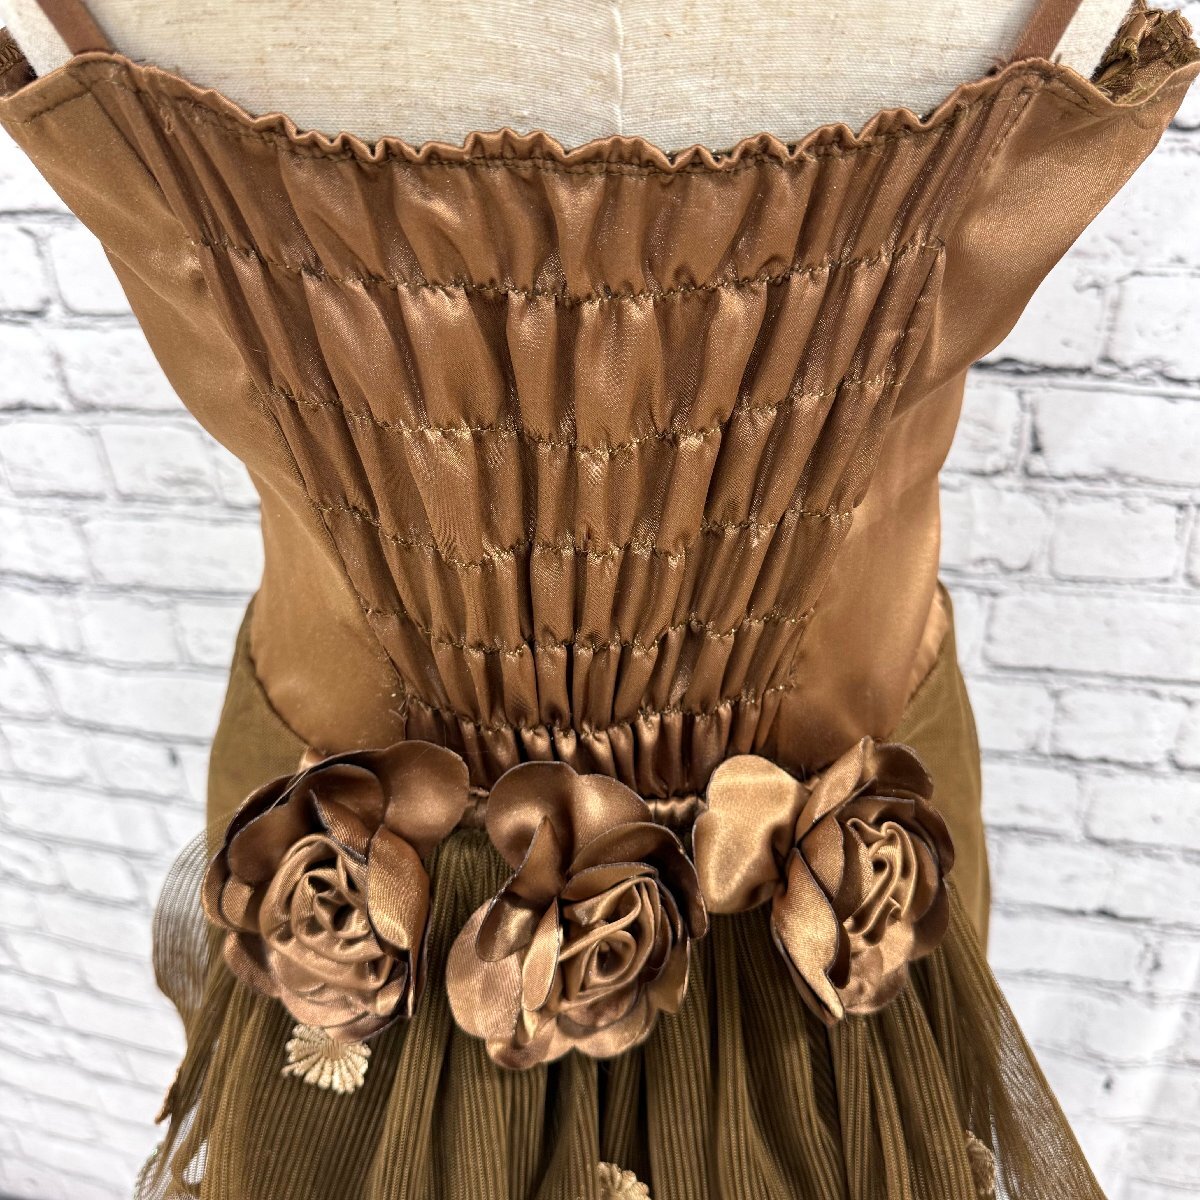 Sil-hou-ette tea Brown color dress party dress dress . costume wedding wedding ... costume Mai pcs departure table cosplay embroidery 